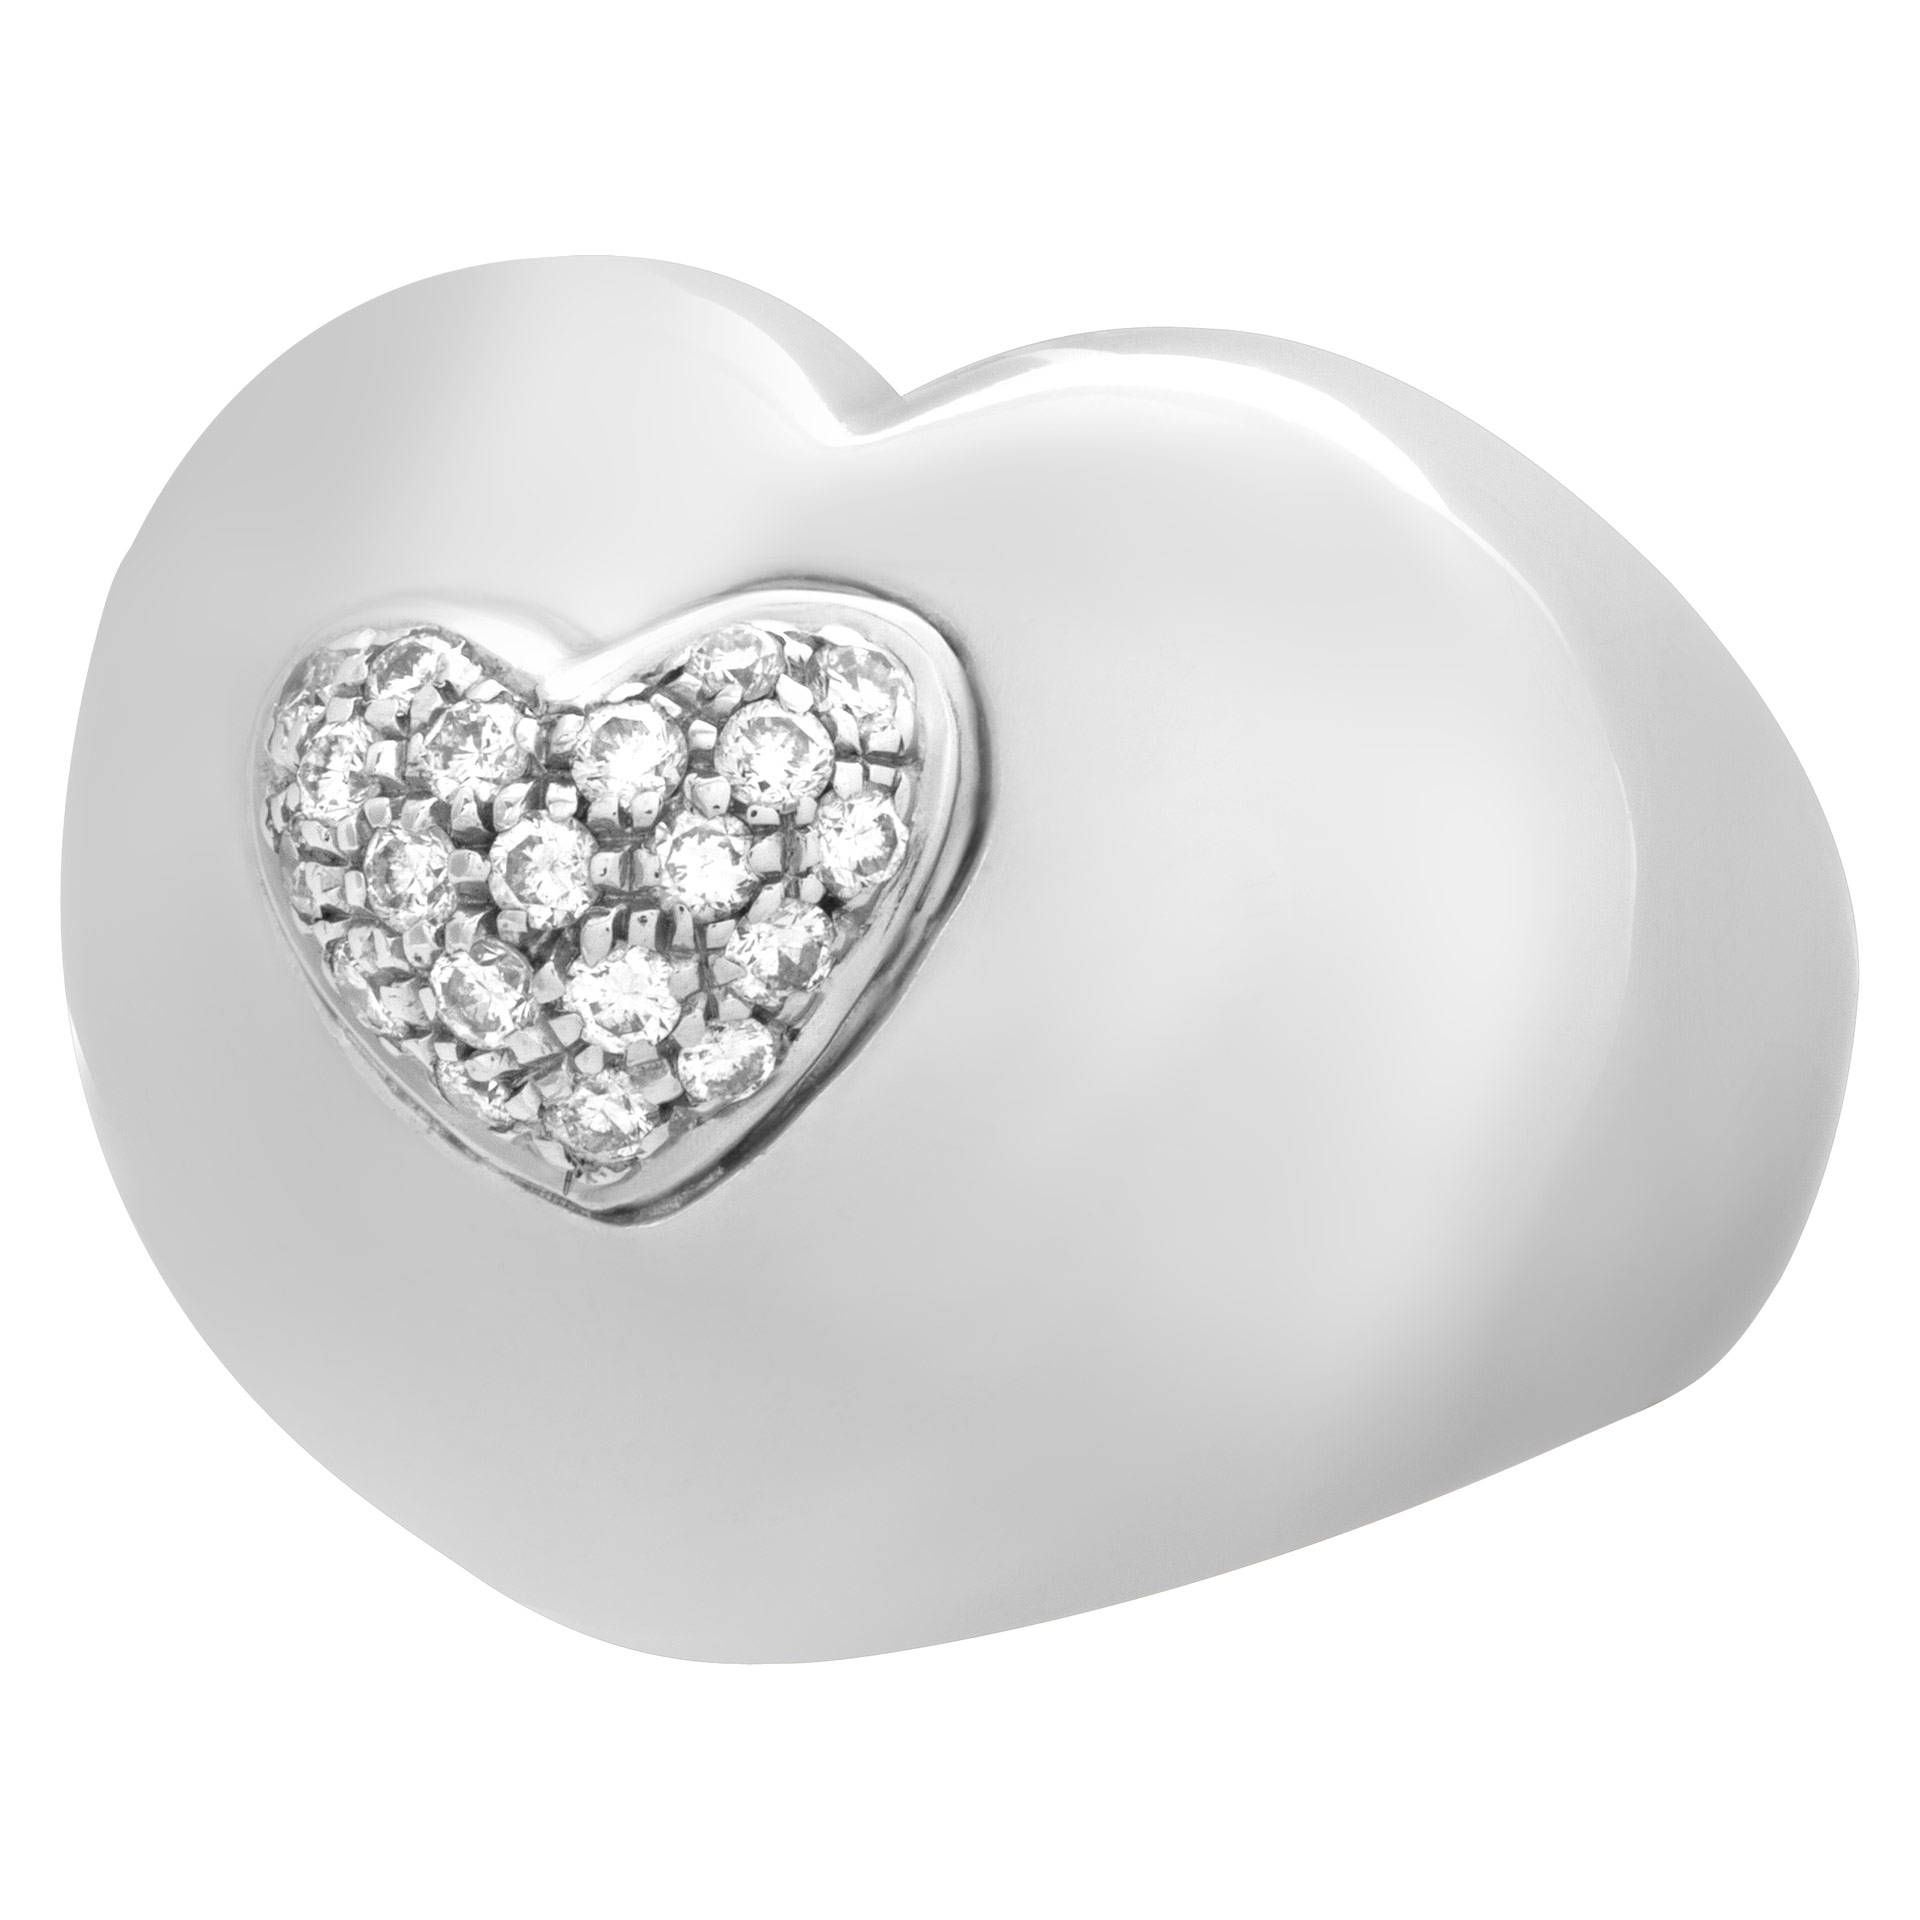 Pave diamond heart shaped ring in 18k white gold. Size 7